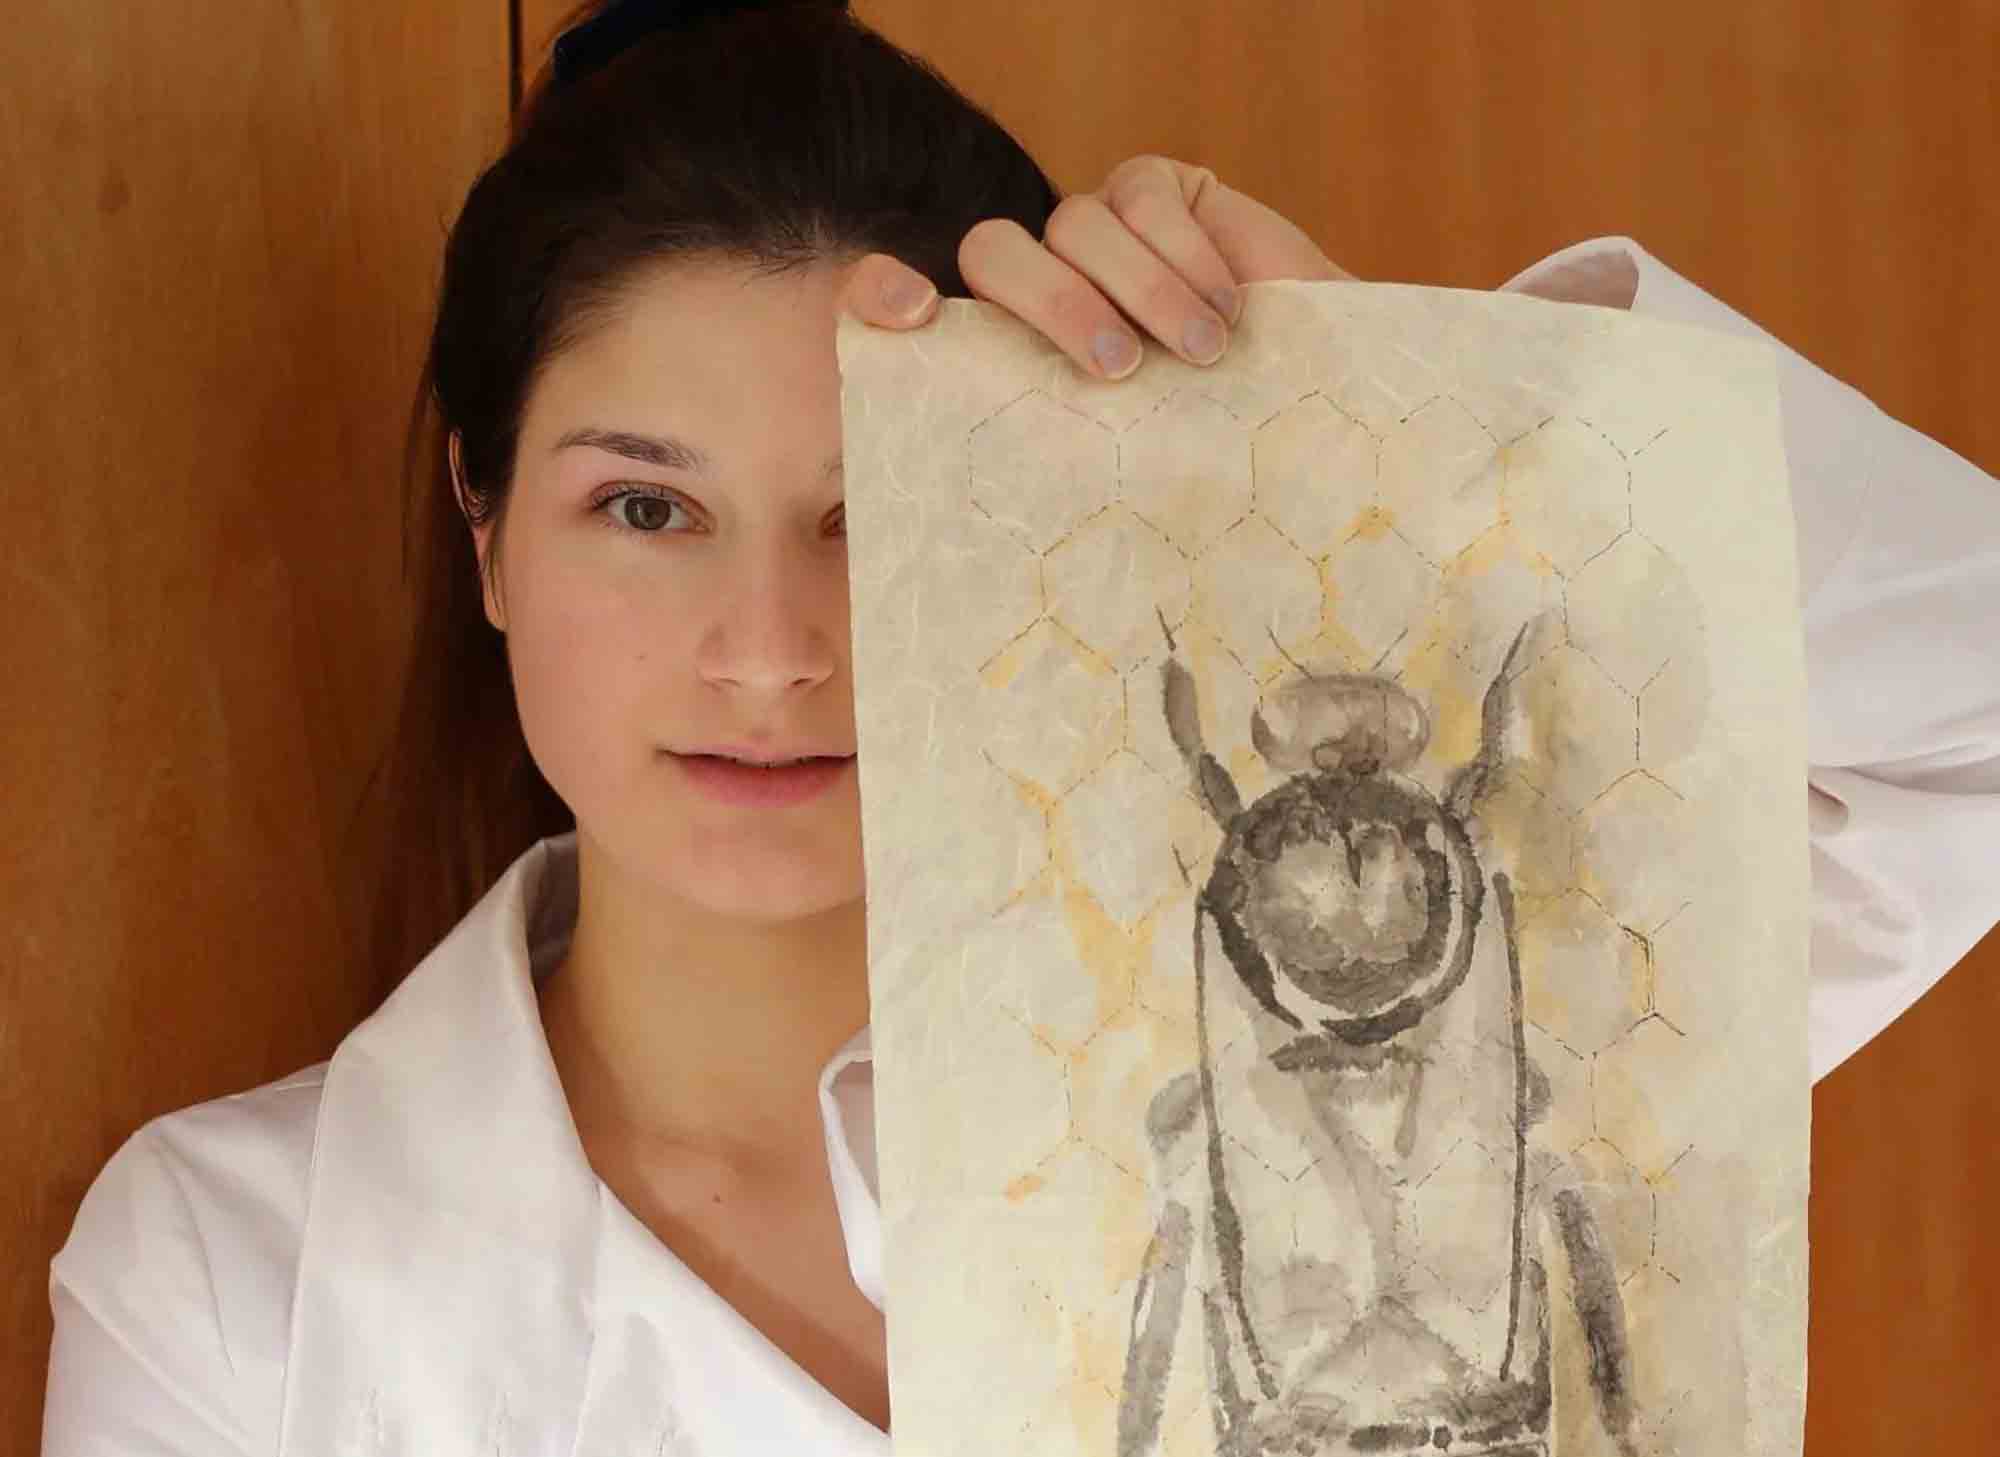 Young Artist’s Bee Portrayals Celebrate Their Value…